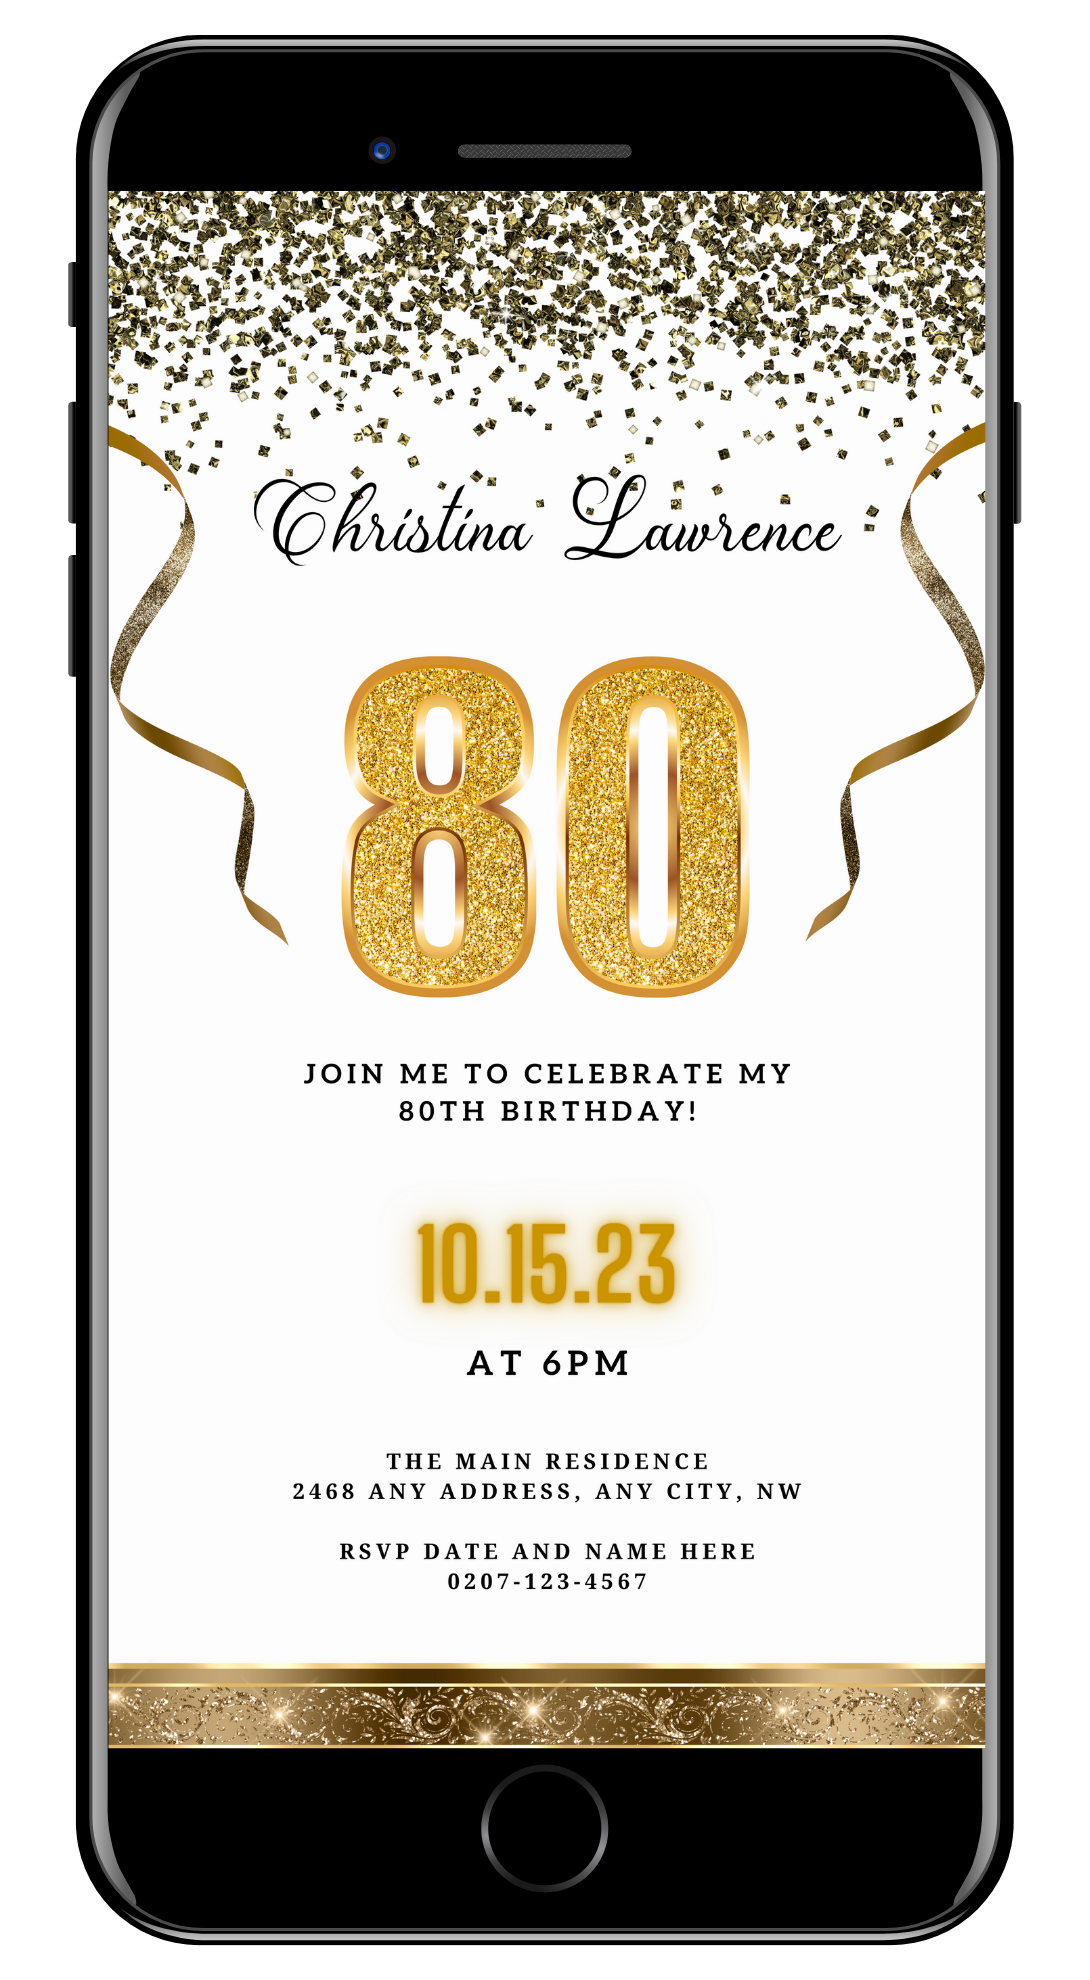 Customizable Digital White Gold Confetti 80th Birthday Evite displayed on smartphone, featuring gold text and ribbons. Ideal for easy personalization and electronic sharing via Canva.